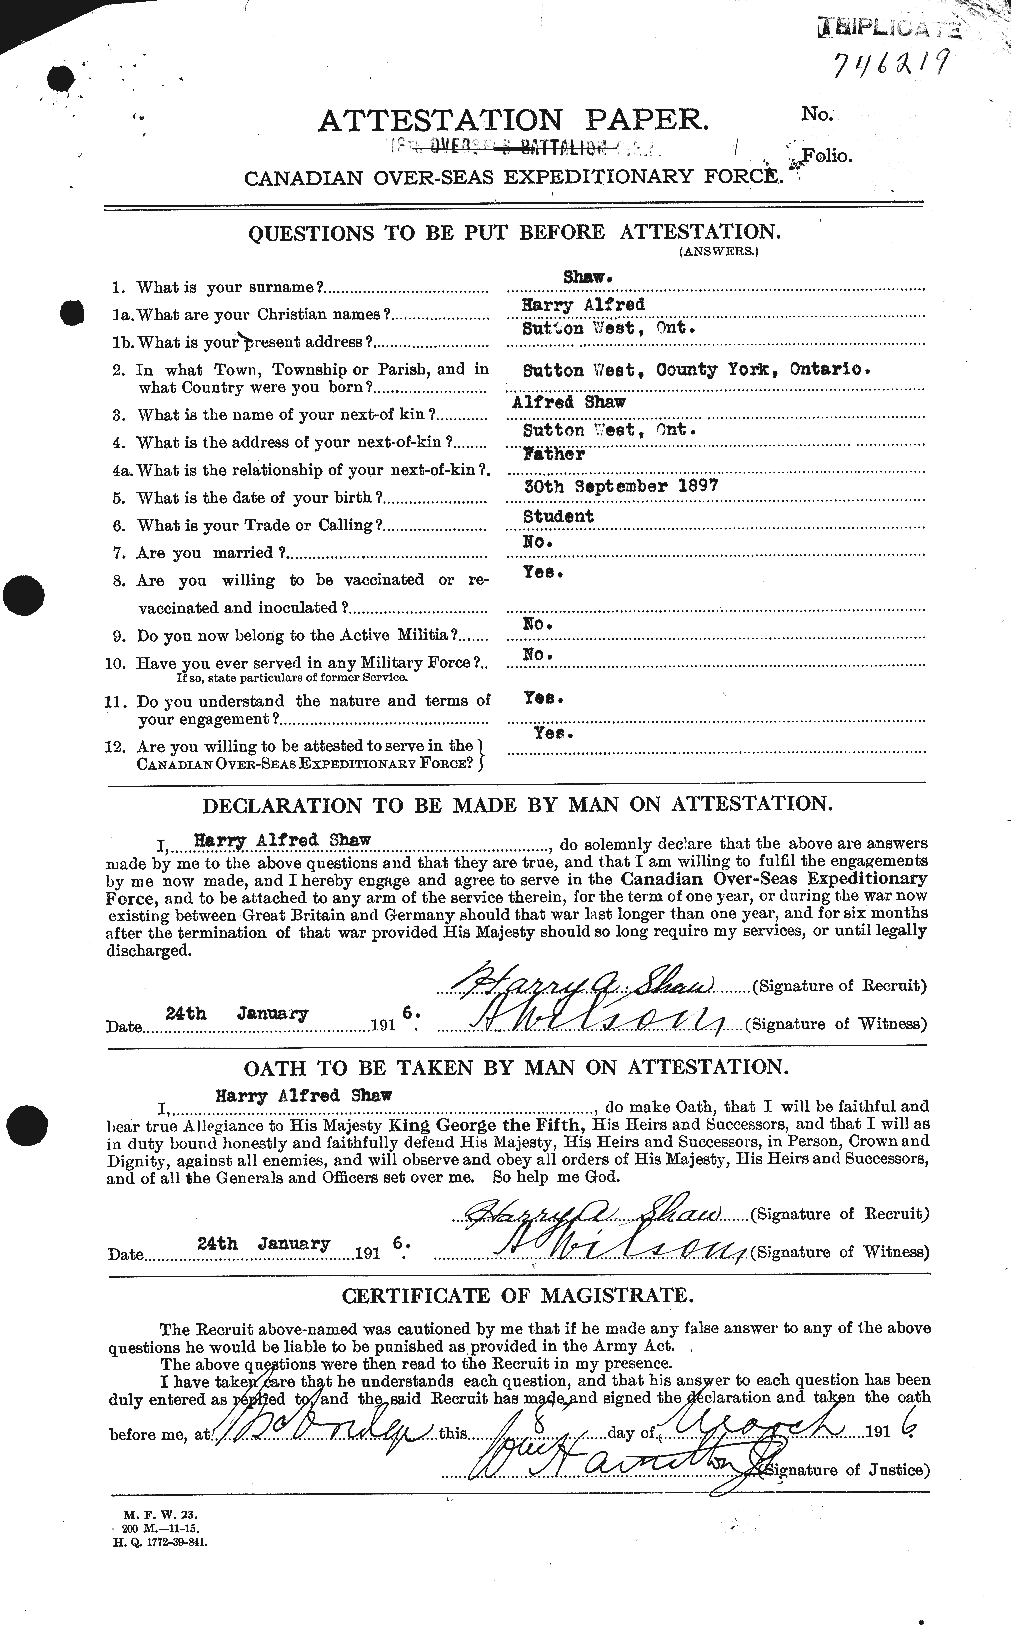 Personnel Records of the First World War - CEF 091361a